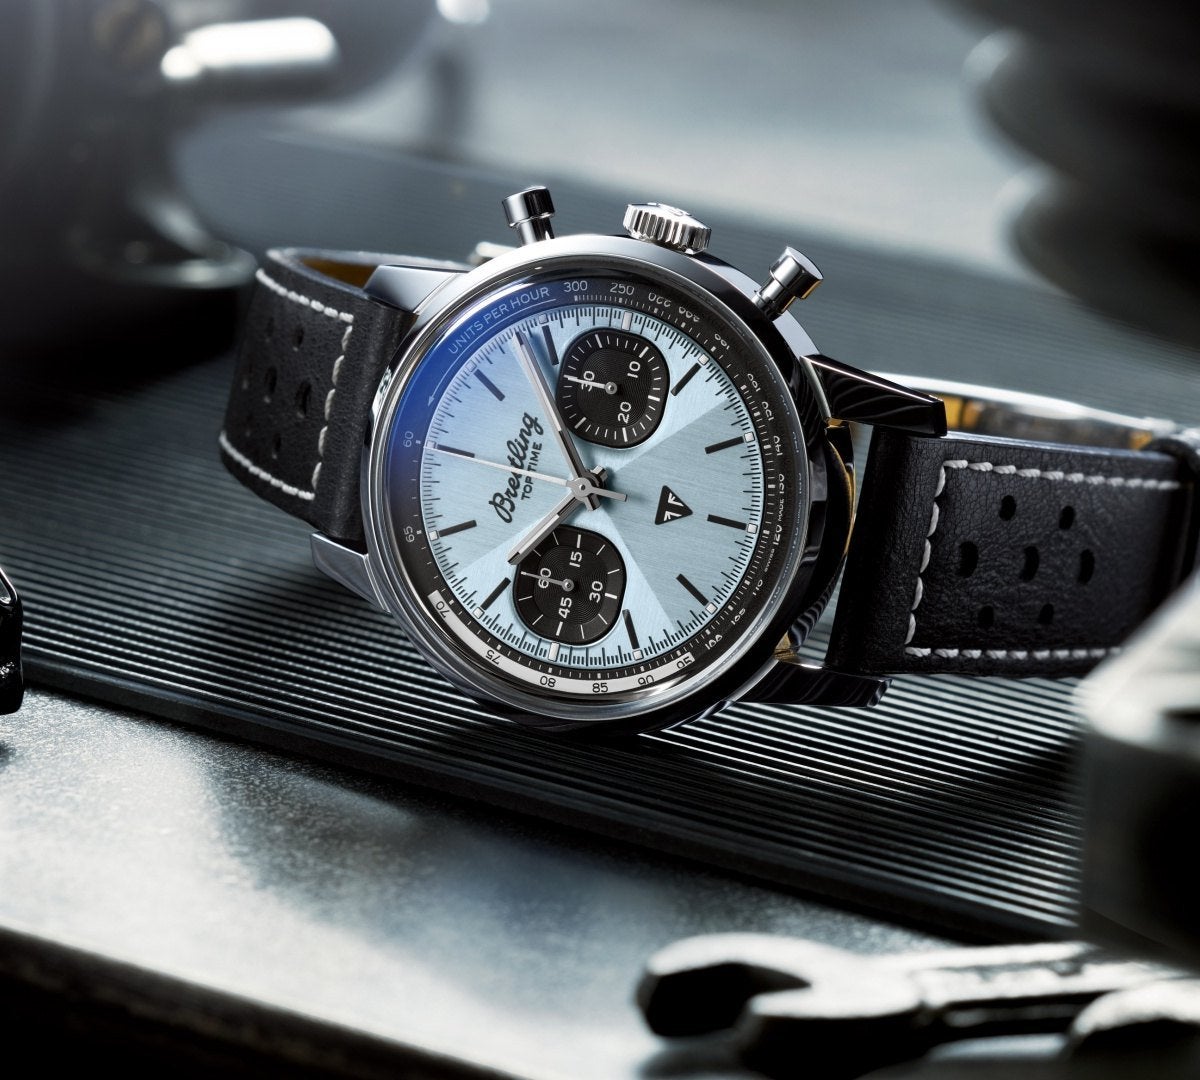 Just saw the new Breitling Top Time Triumph | WatchUSeek Watch Forums